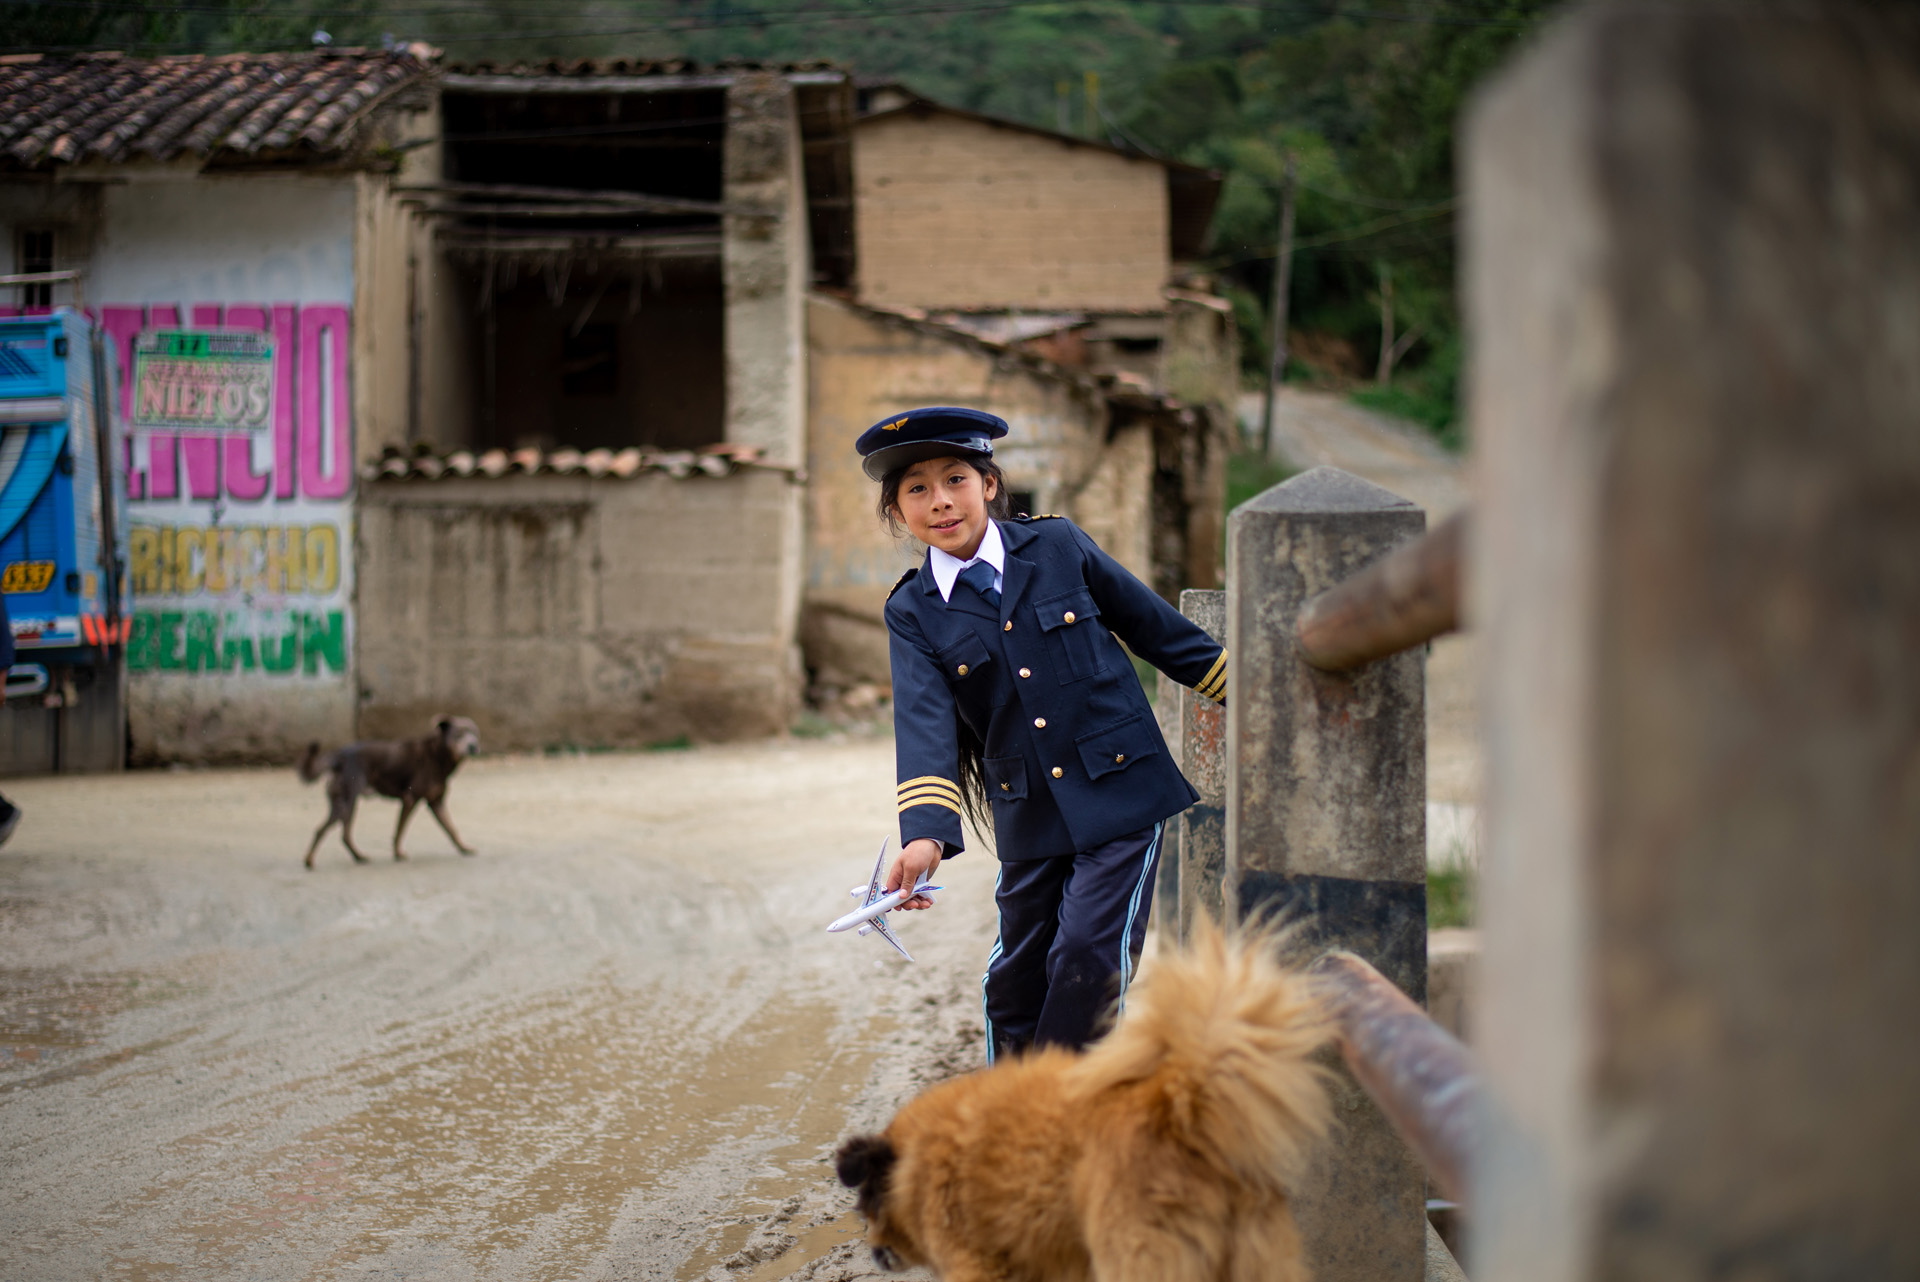 8-year-old Flor in Peru wants to be a pilot when she grows up